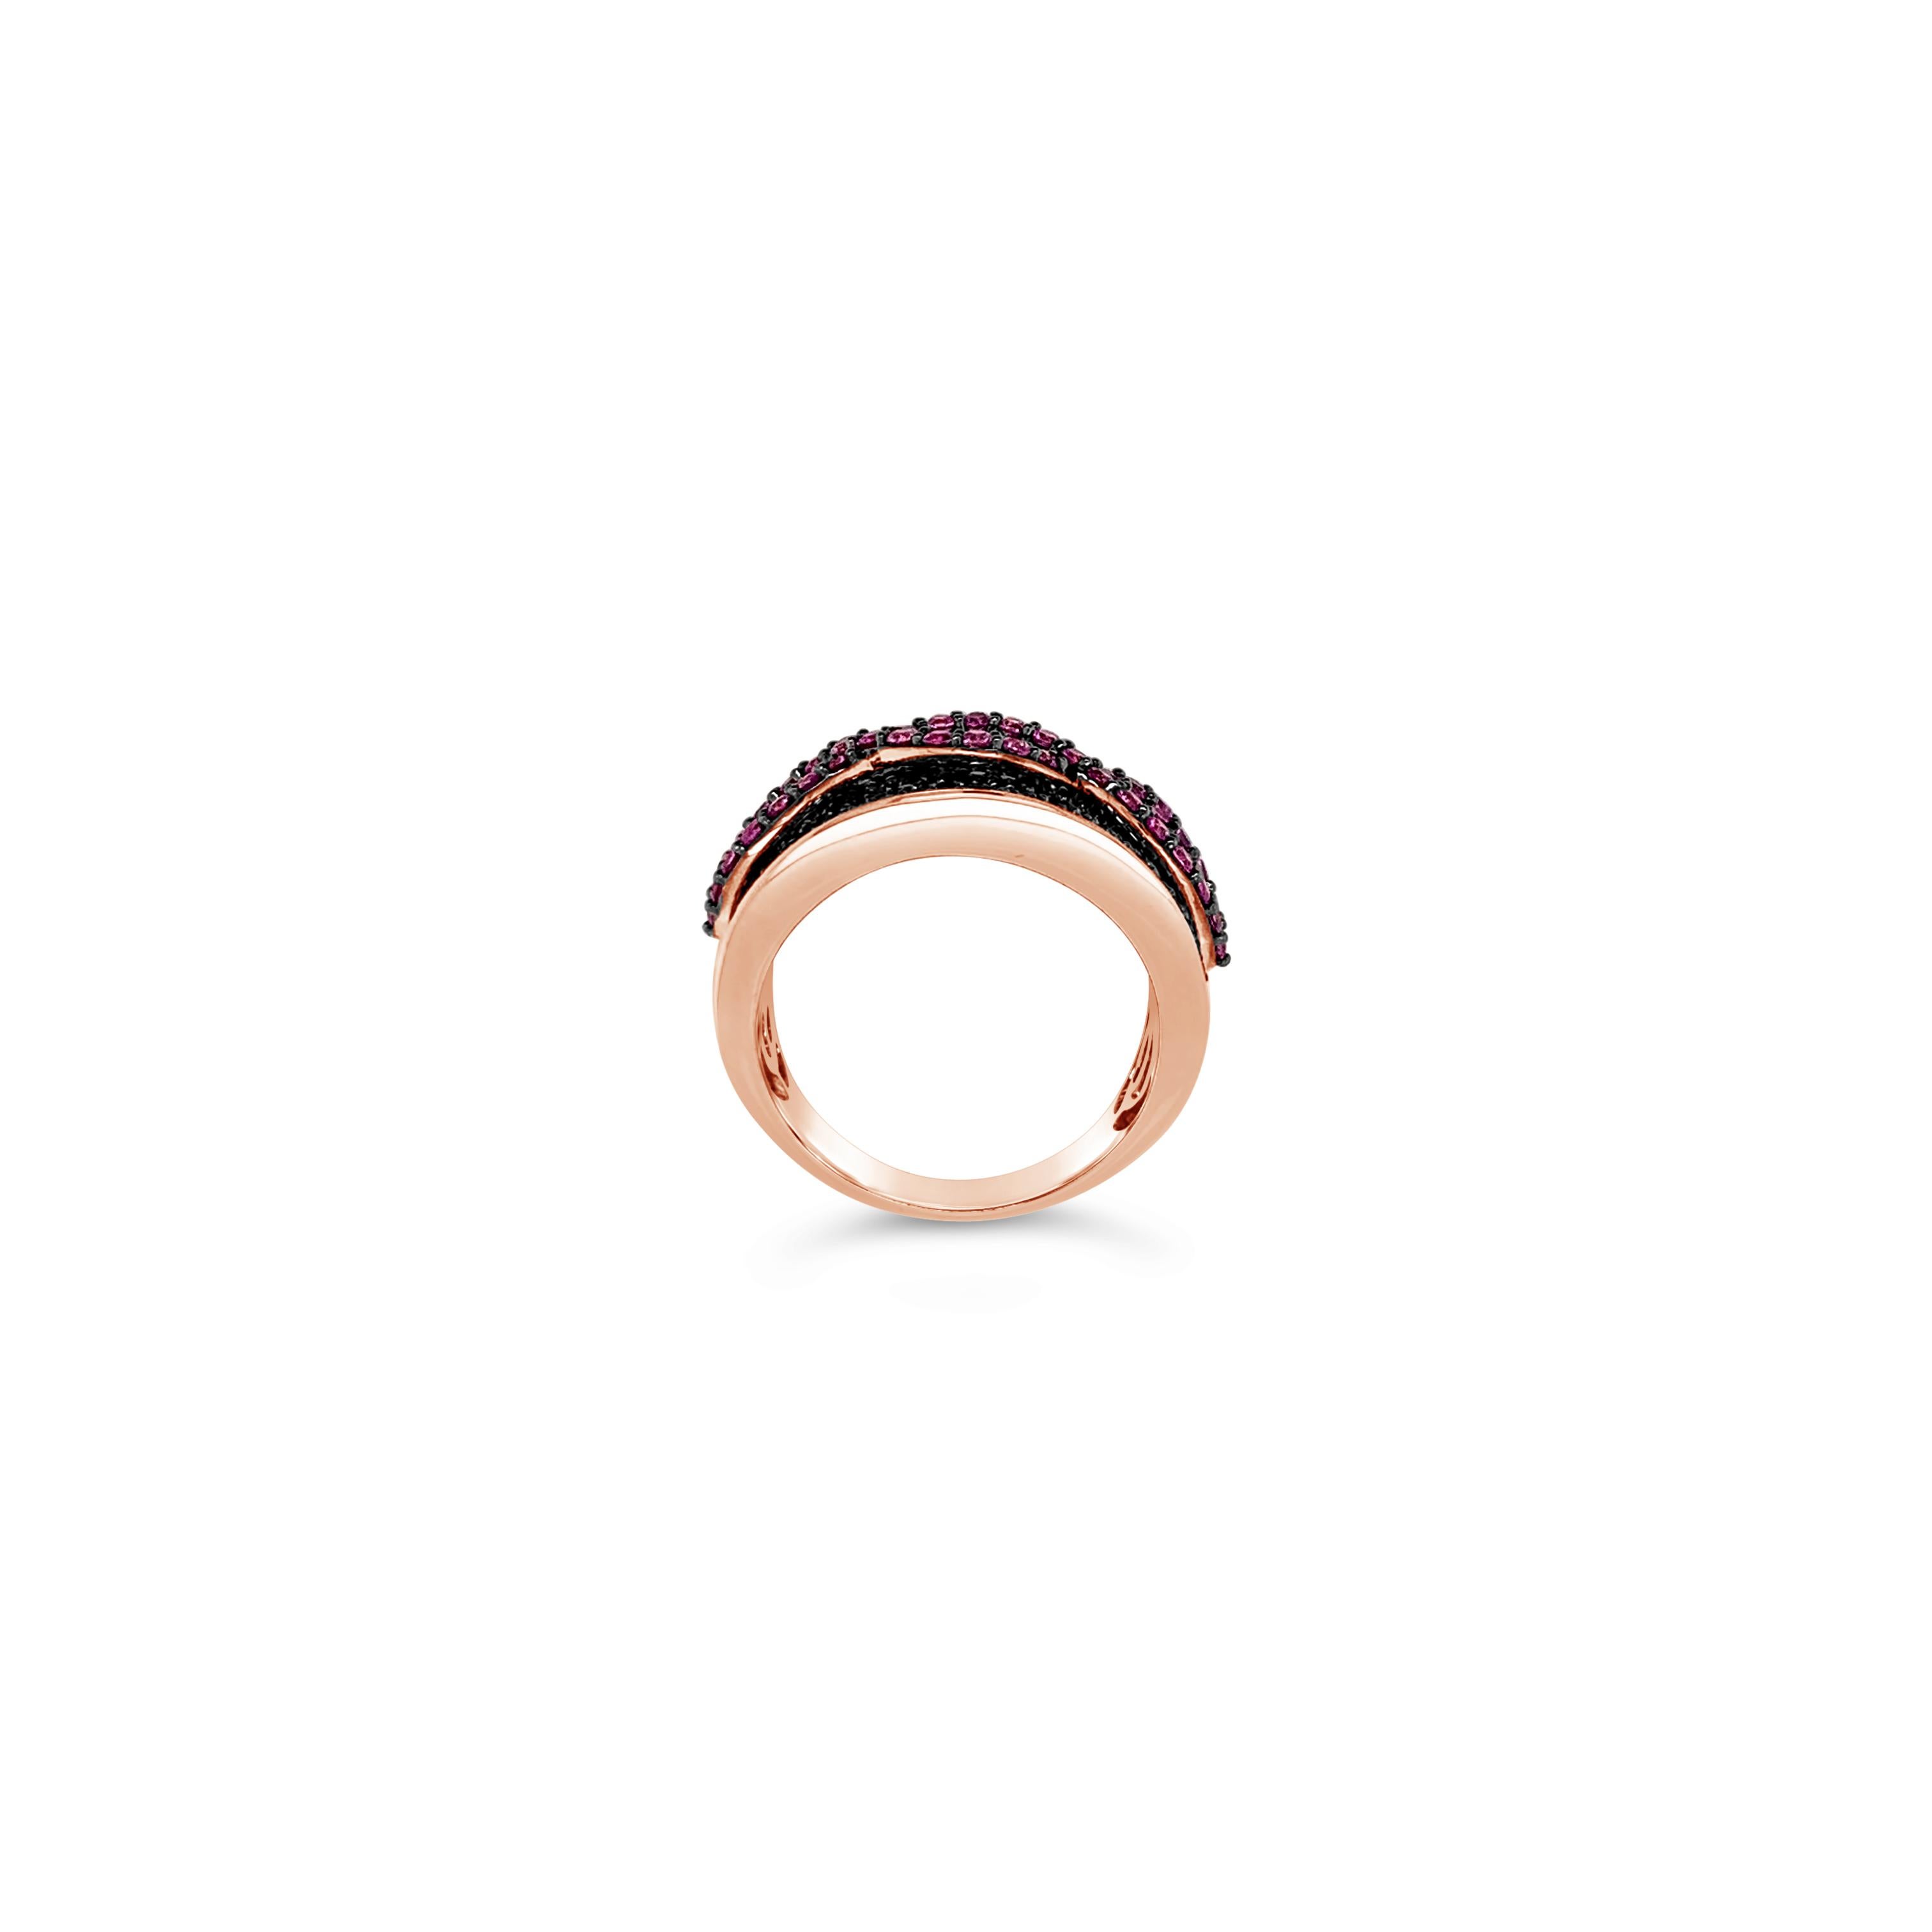 Le Vian® Ring featuring 0.77 cts. Bubble Gum Pink Sapphire, 0.96 cts. Blackberry Diamonds® set in 14K Strawberry Gold®

Diamonds Breakdown:
.96 cts Black Diamonds

Gems Breakdown:
.77 cts Pink Sapphire

Ring Size 7. Ring may or may not be sizable.